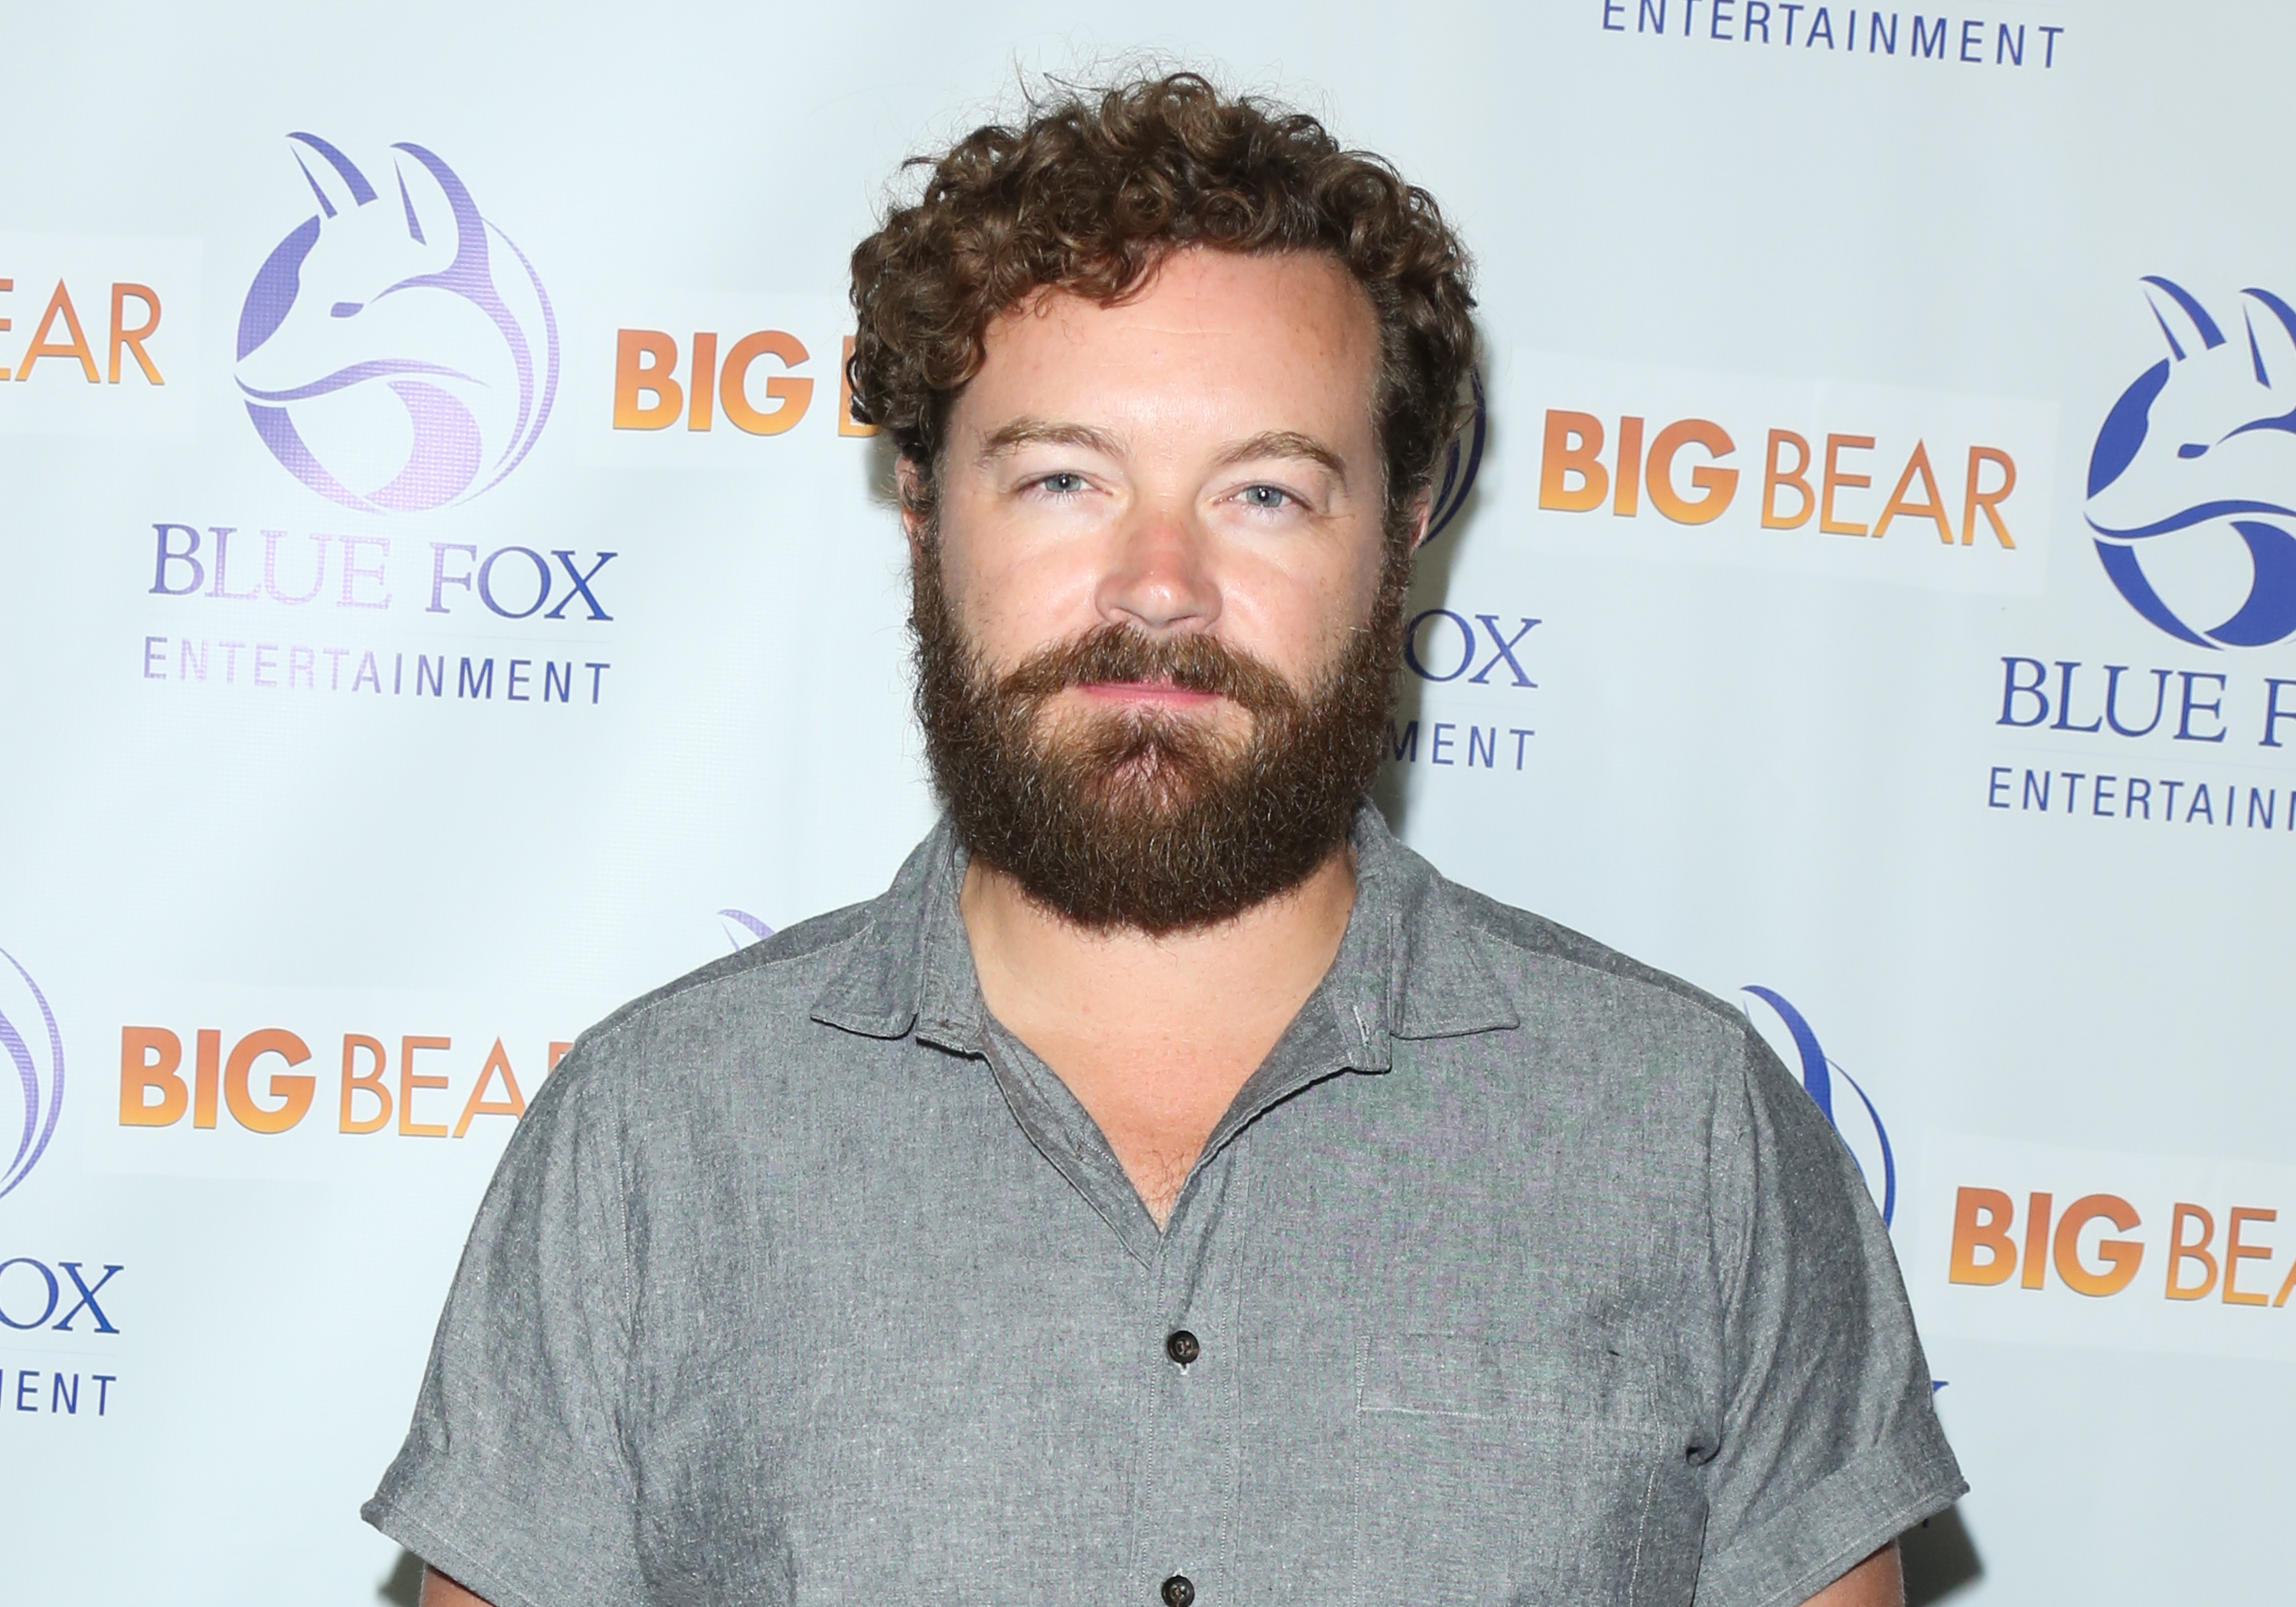 Danny Masterson attends the premiere of "Big Bear" at The London Hotel on September 19, 2017 in West Hollywood, California. (Paul Archuleta—FilmMagic)